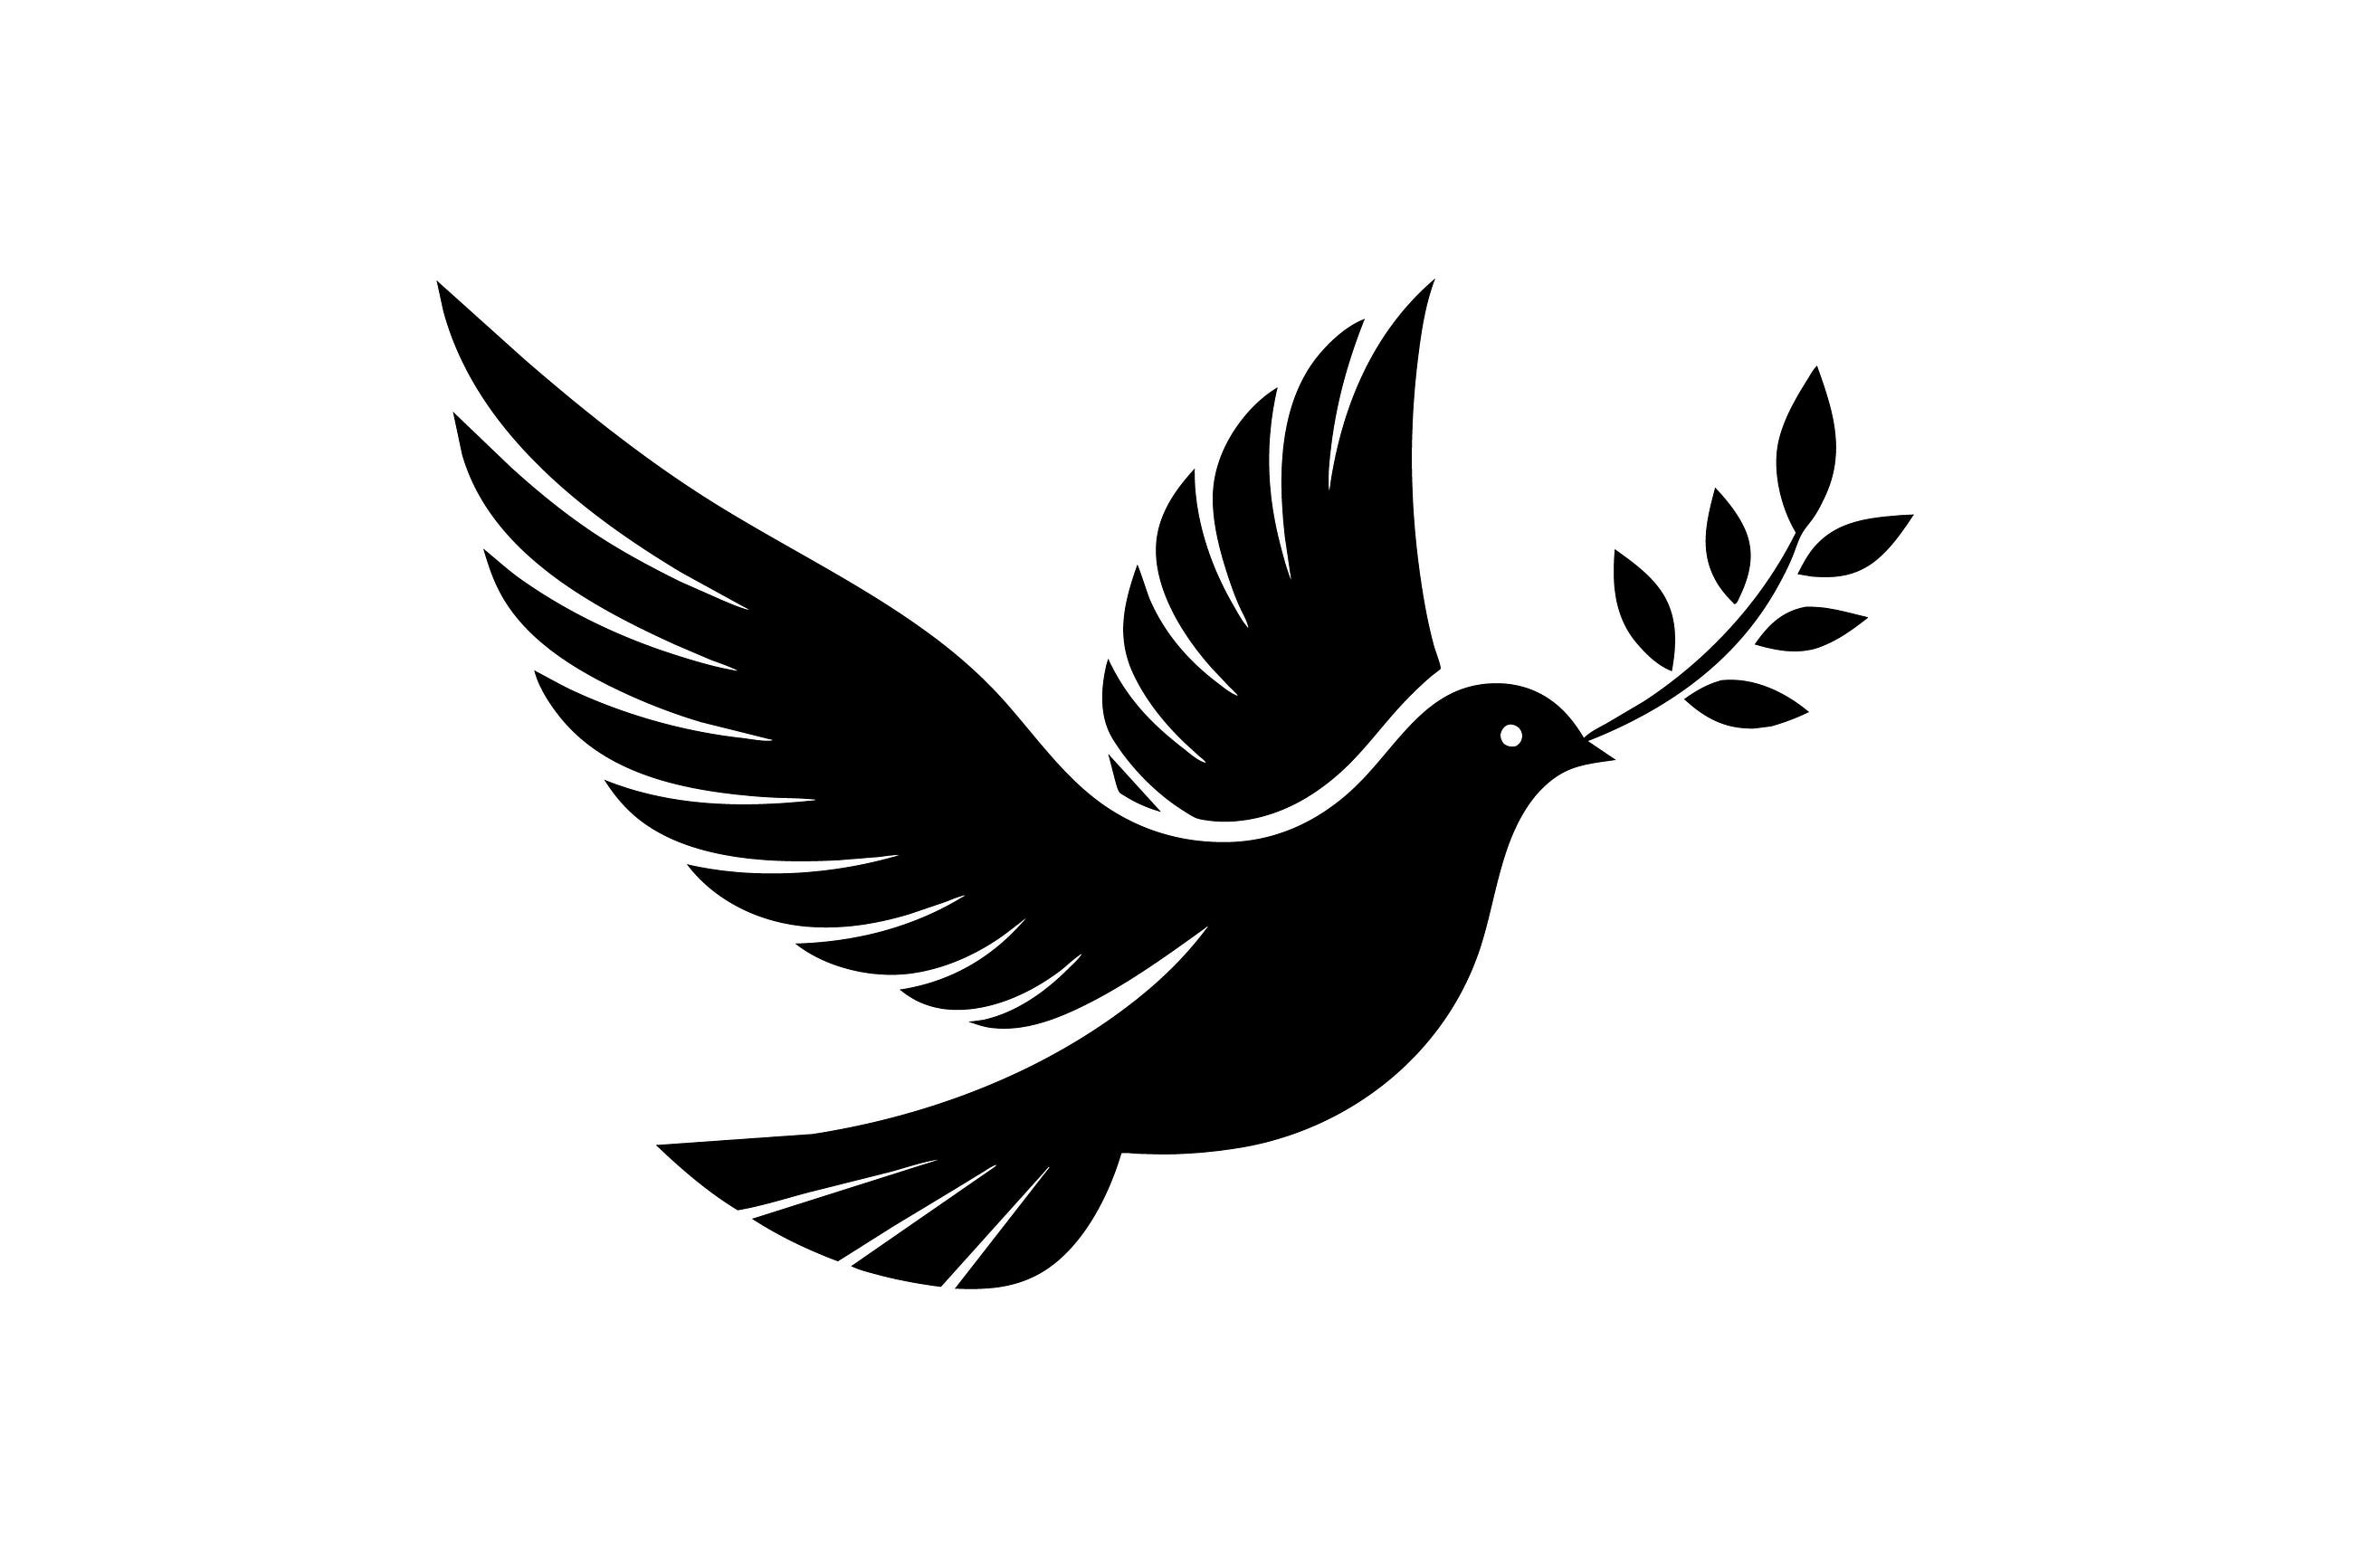 Logo of a White Dove Holding a Olive Free Download